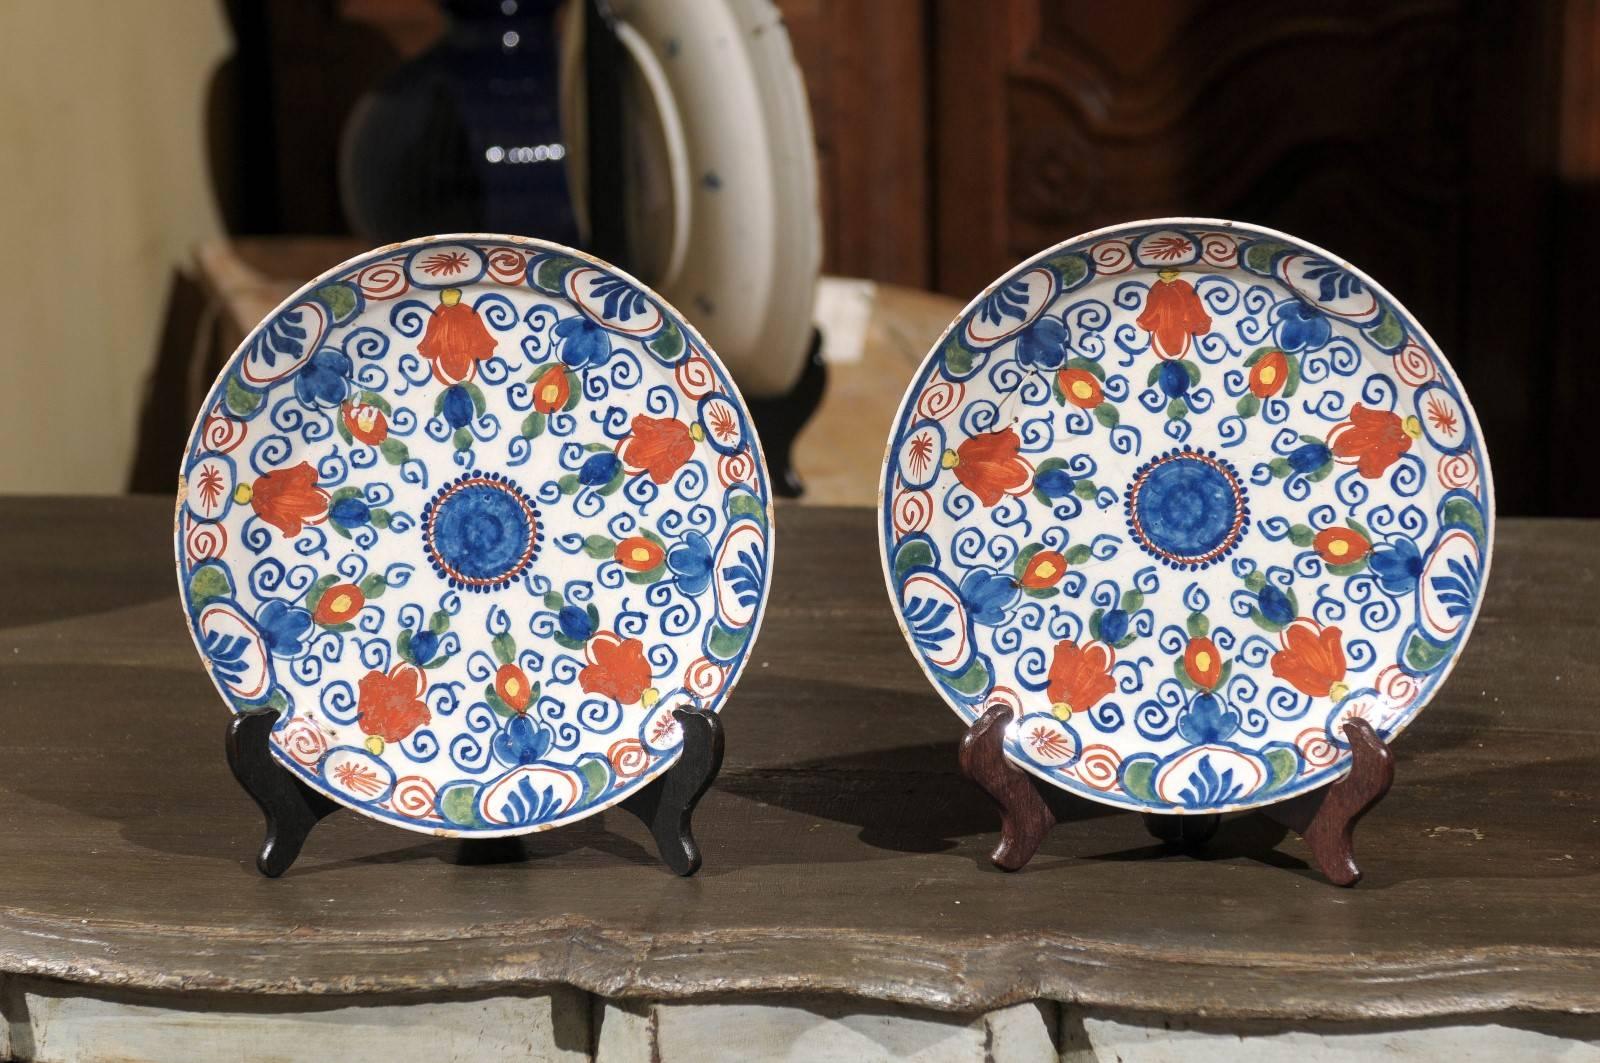 Pair of 17th Century Polychrome Delft Plates, circa 1690
An all-over design with vibrant colors for this pair of polychrome delft plates.